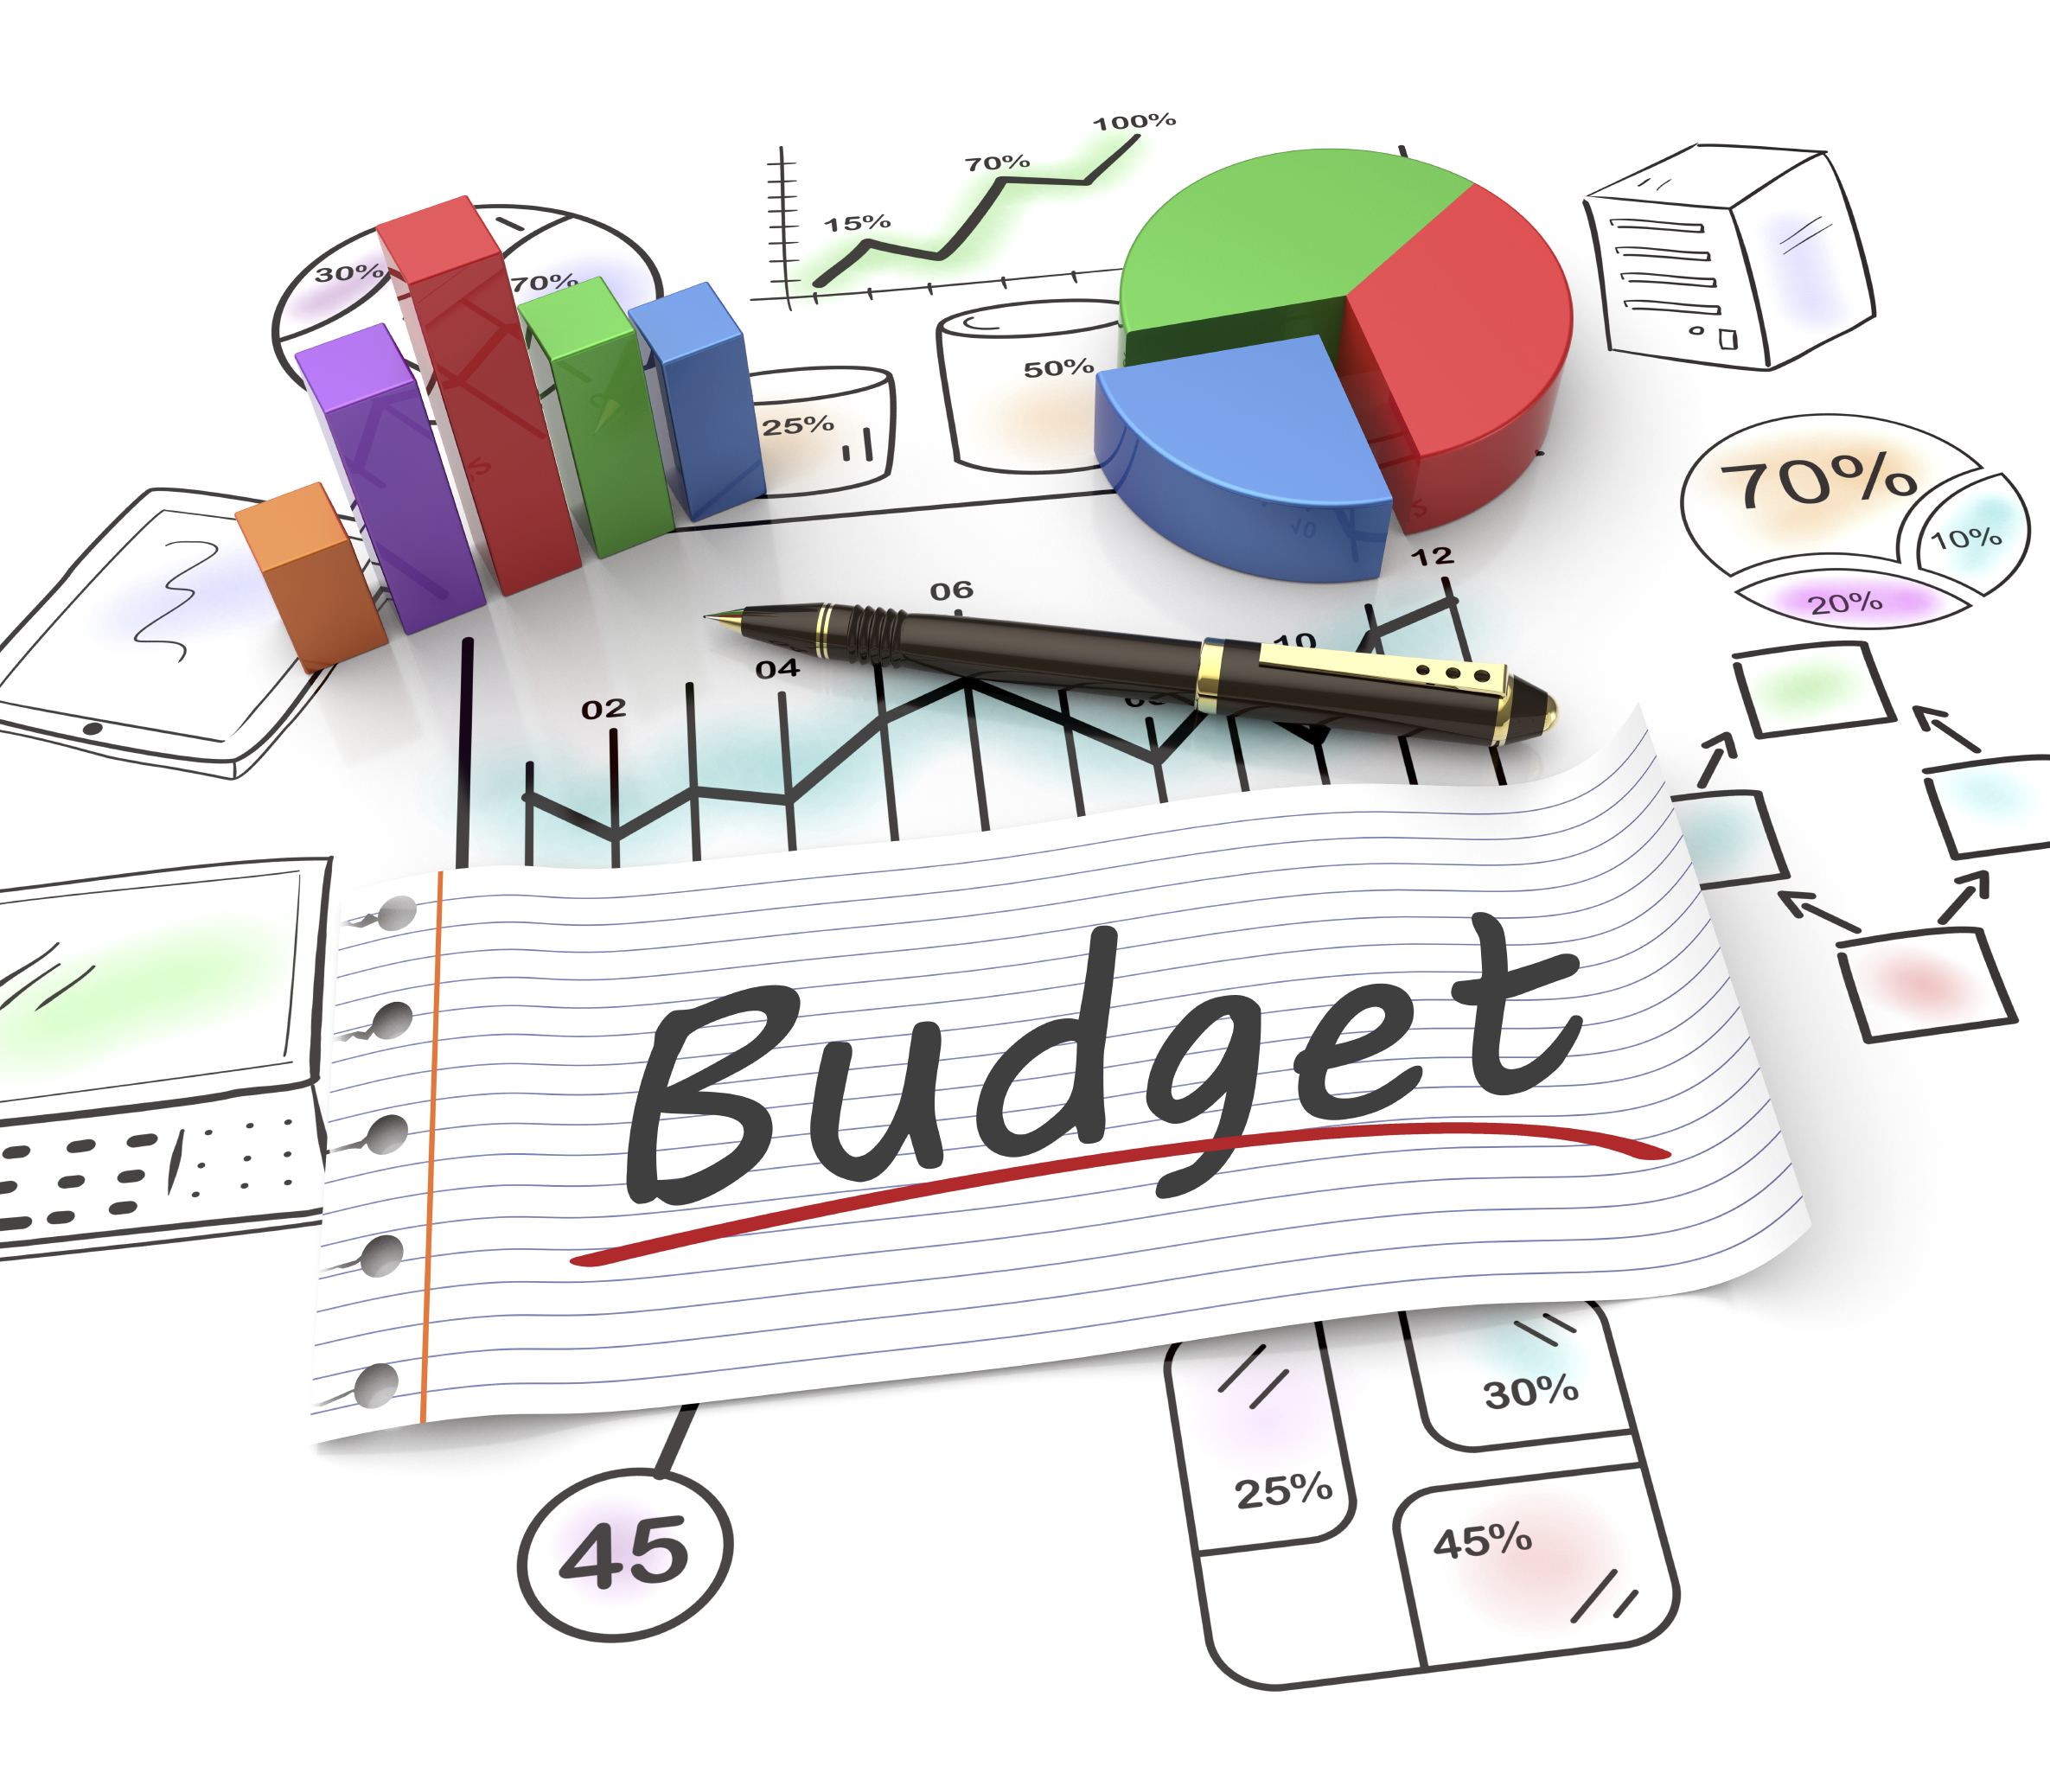 Odisha to present supplementary budget in mid-November